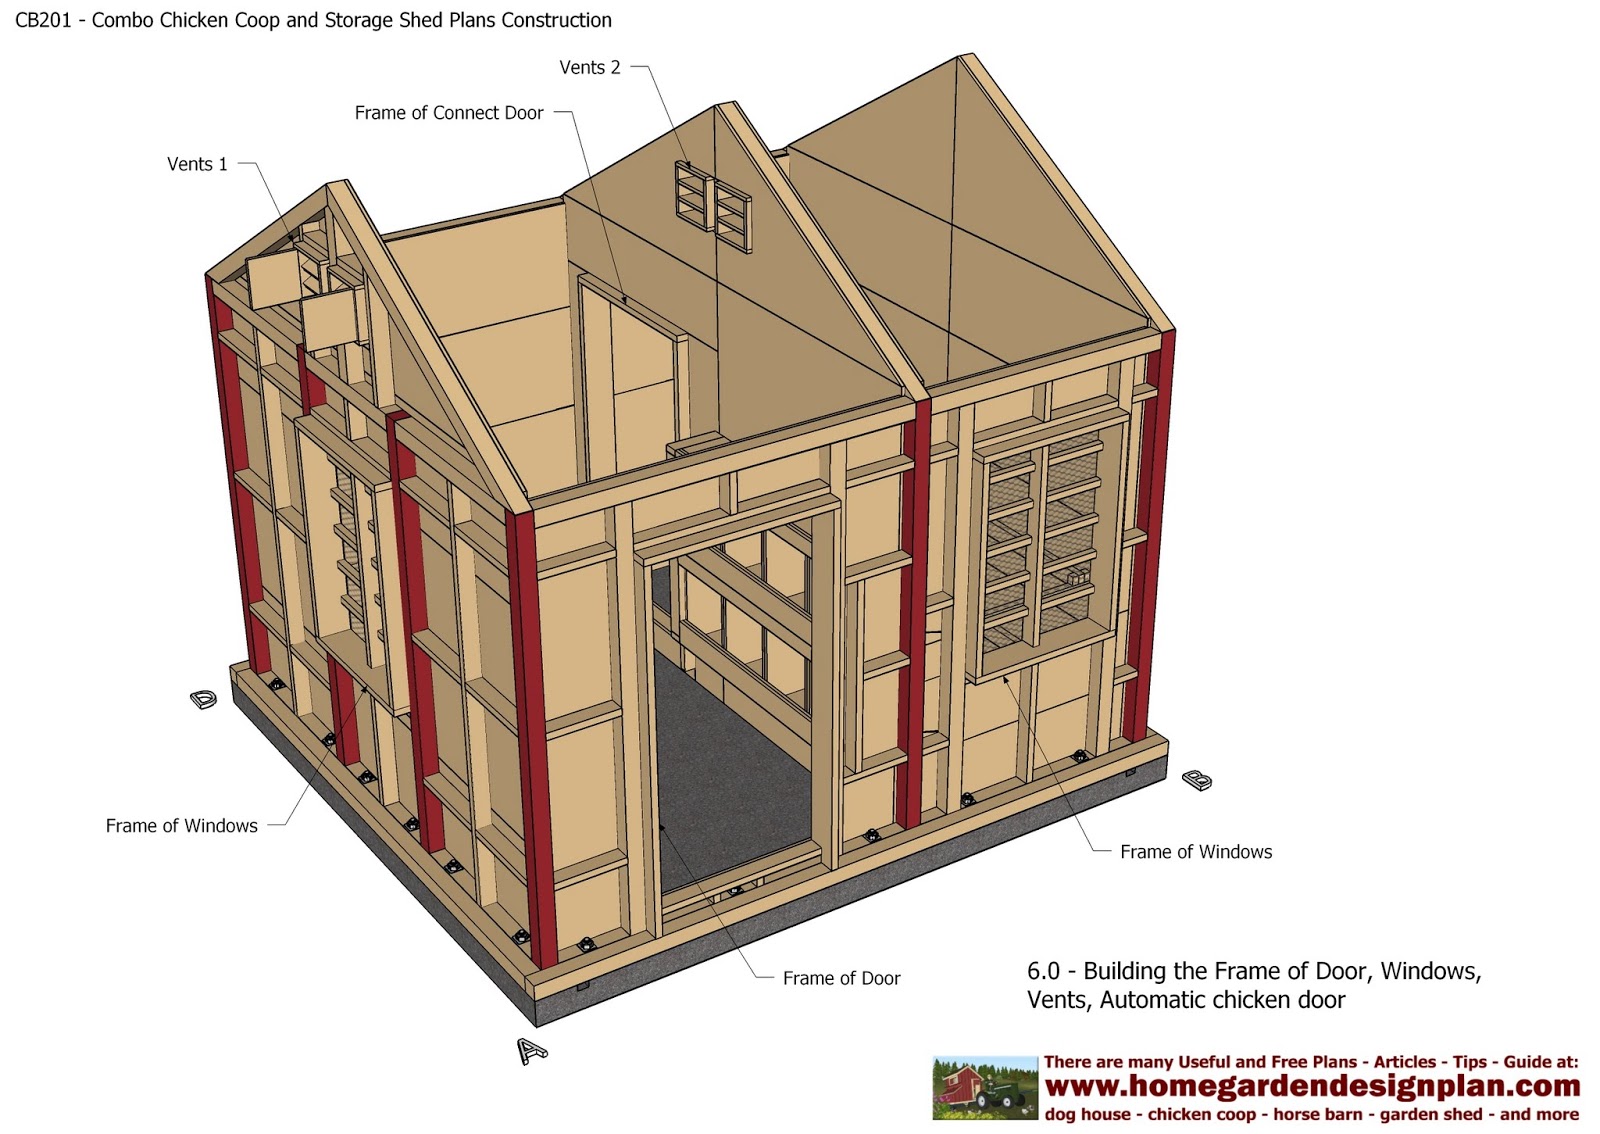 CB201 - Combo Plans - Chicken Coop Plans Construction + Garden Sheds 